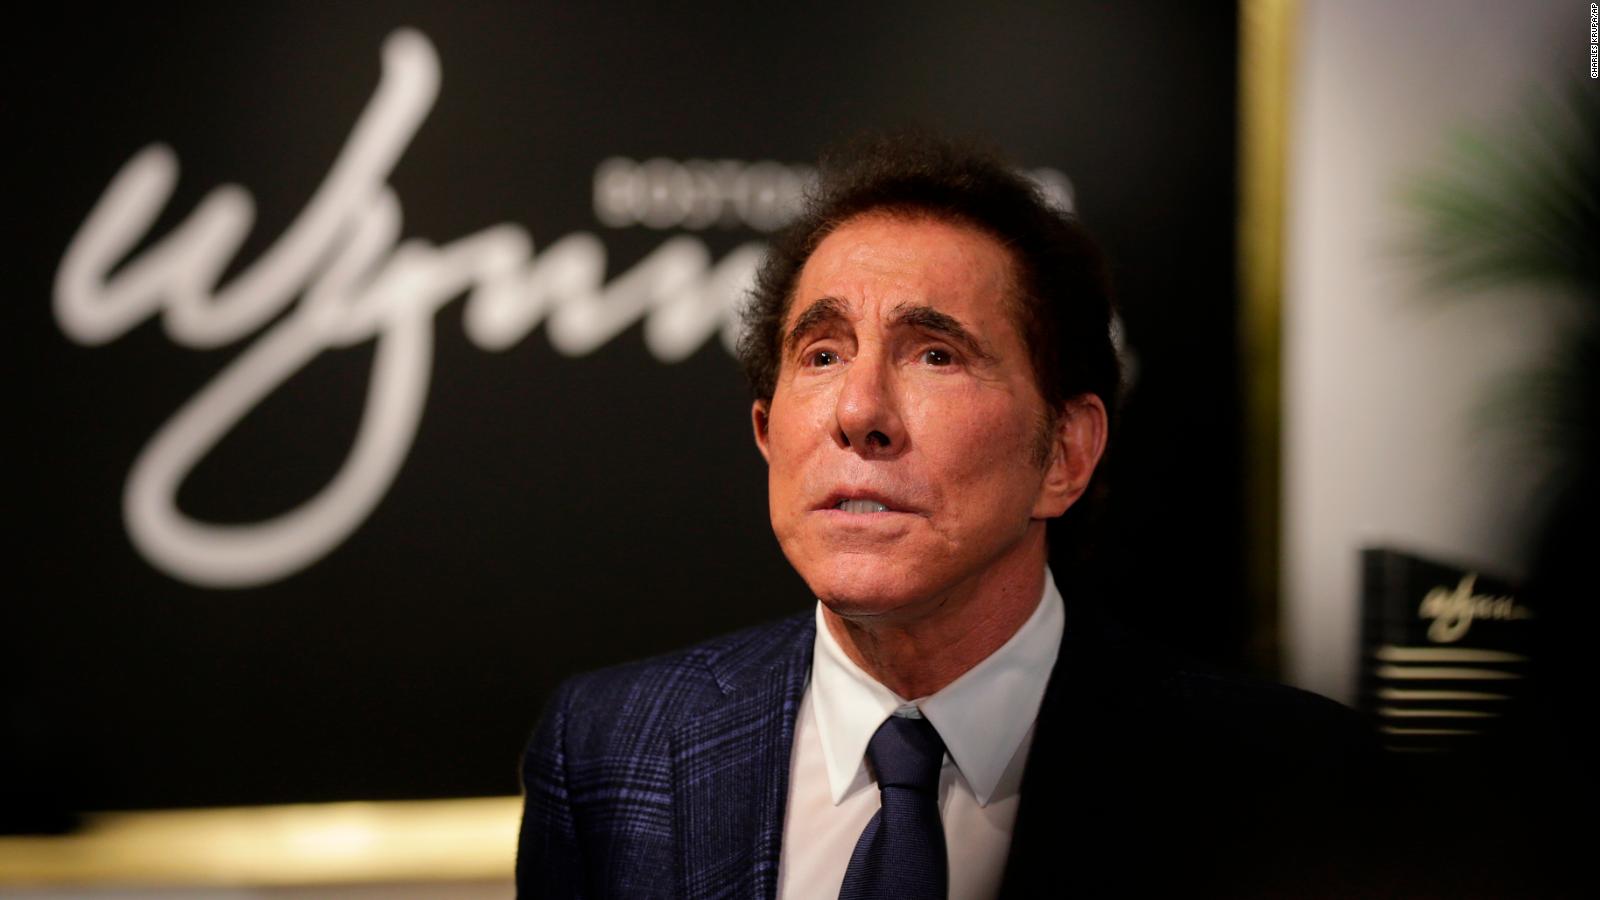 Steve Wynn lawyer accuses woman of extortion over sexual misconduct claims